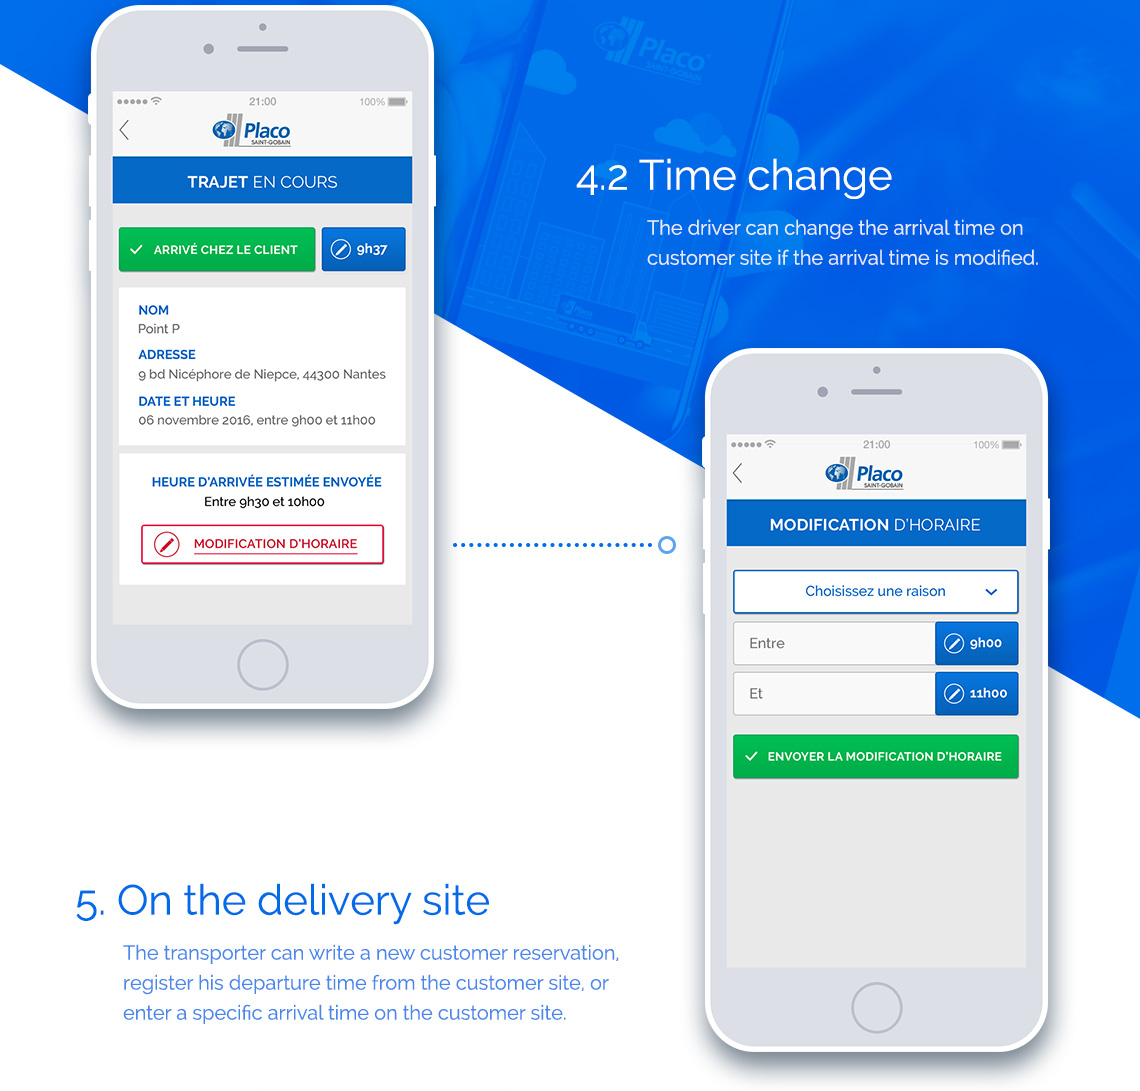 Delivery in progress: Time change, the driver can change the arrival time on customer site if the arrival time is modified.